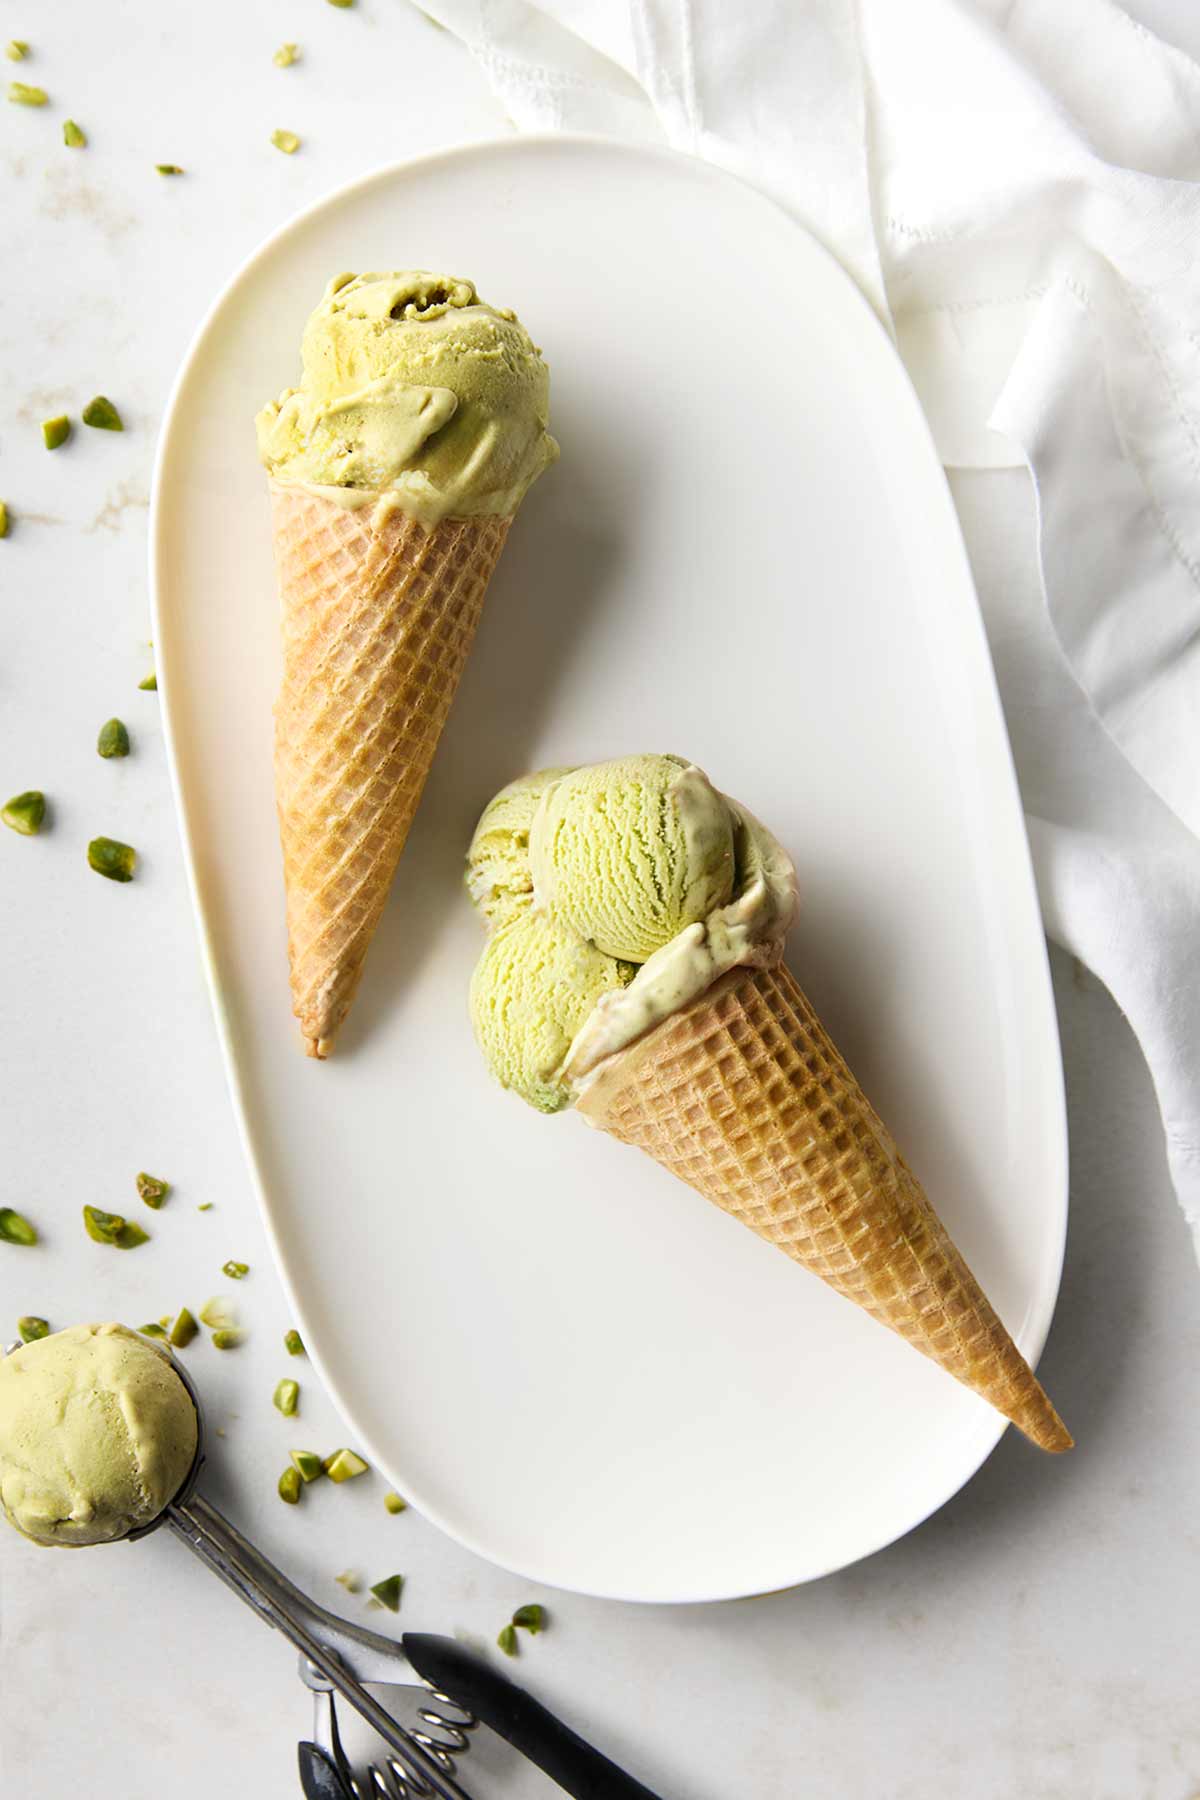 A platter with two ice cream cones filled with pistachio gelato.